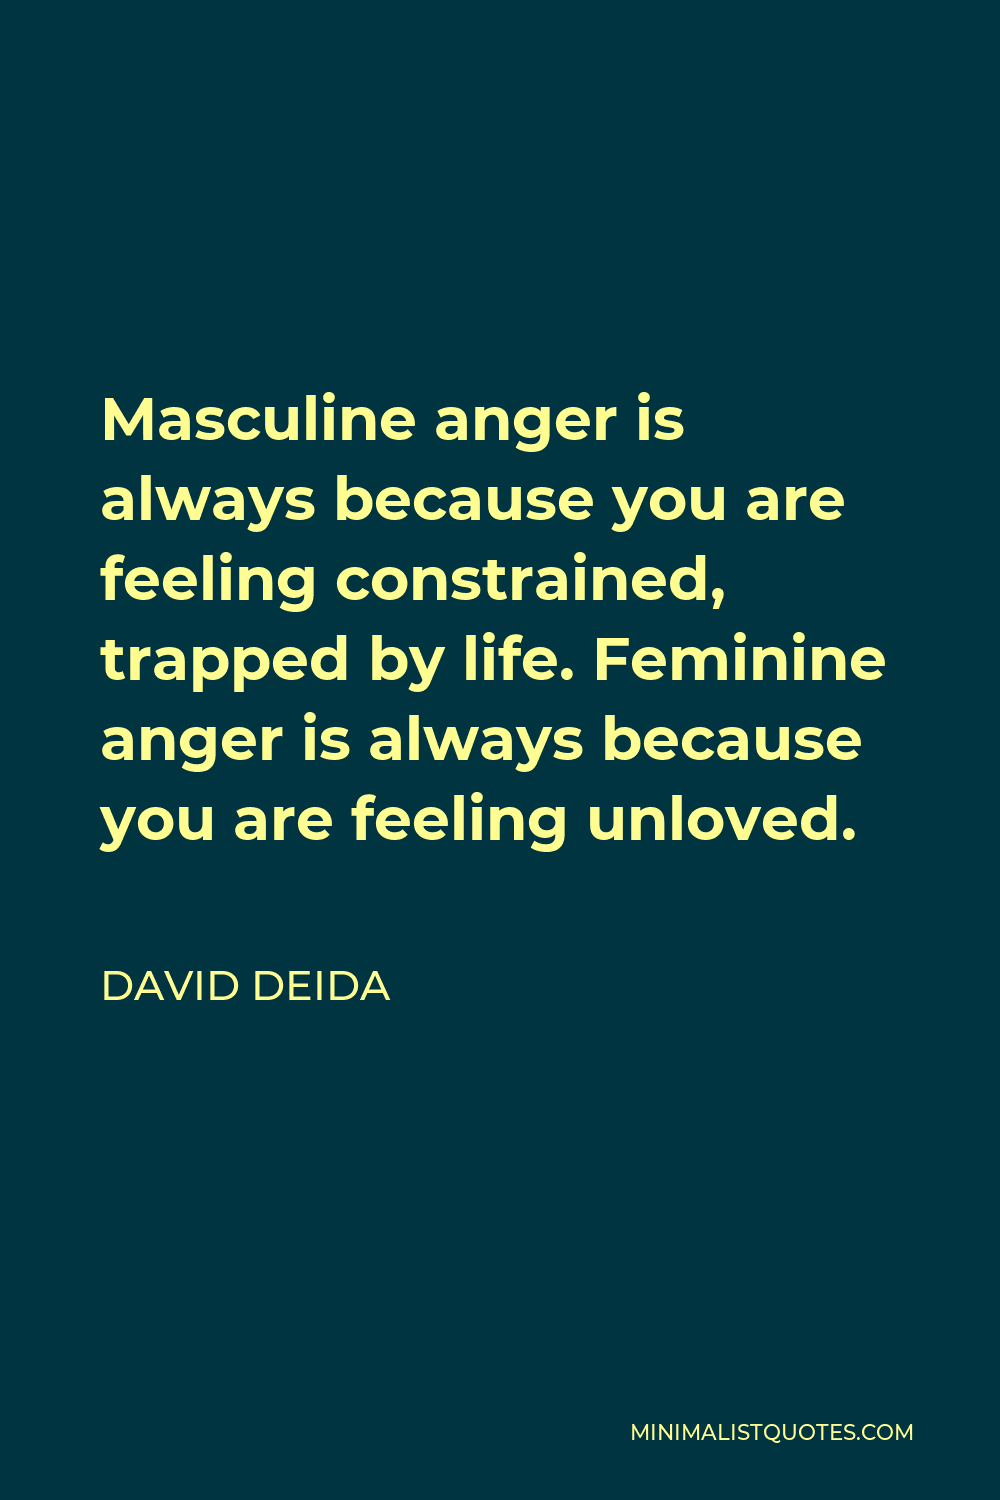 David Deida Quote - Masculine anger is always because you are feeling constrained, trapped by life. Feminine anger is always because you are feeling unloved.